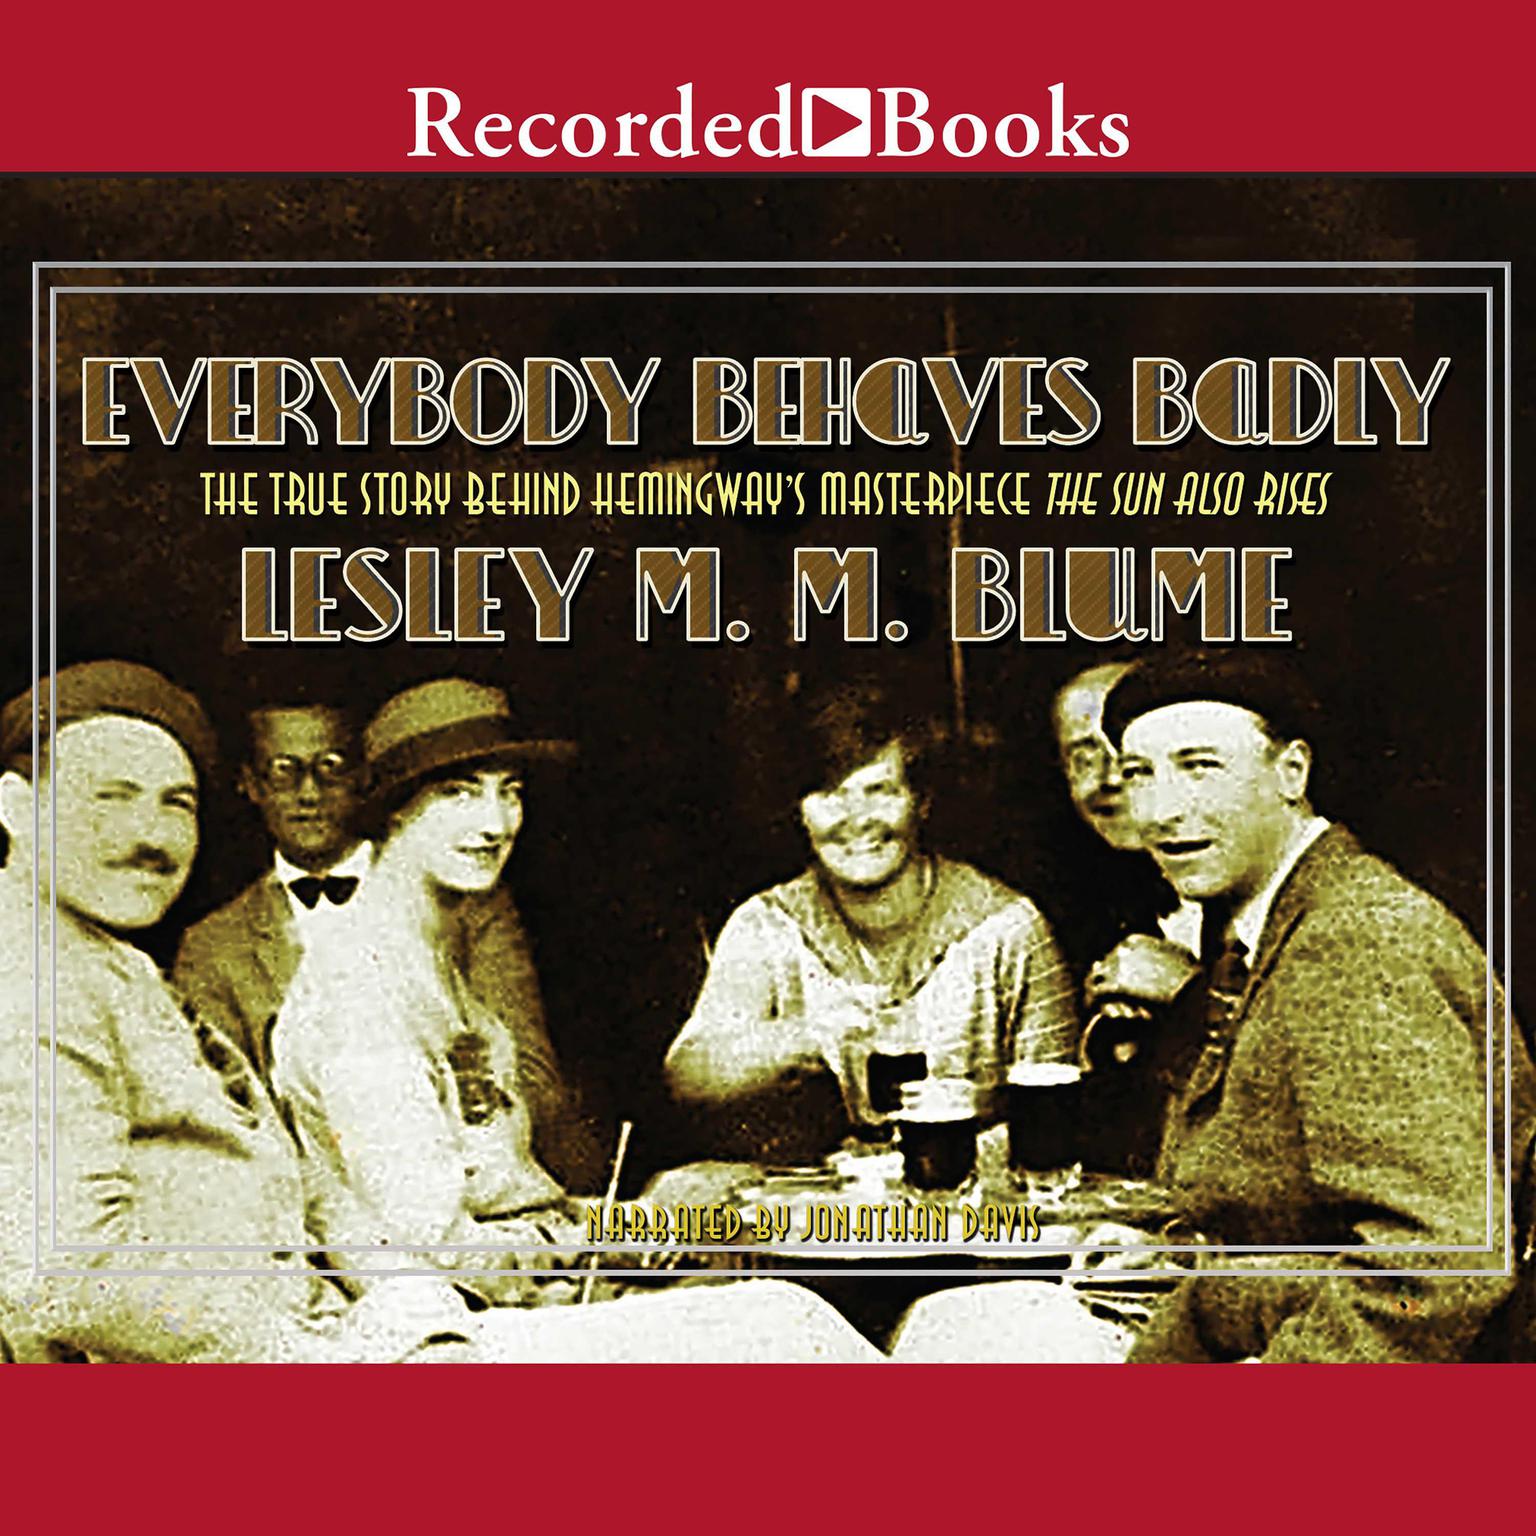 Everybody Behaves Badly: The True Story Behind Hemingways Masterpiece The Sun Also Rises Audiobook, by Lesley M. M. Blume